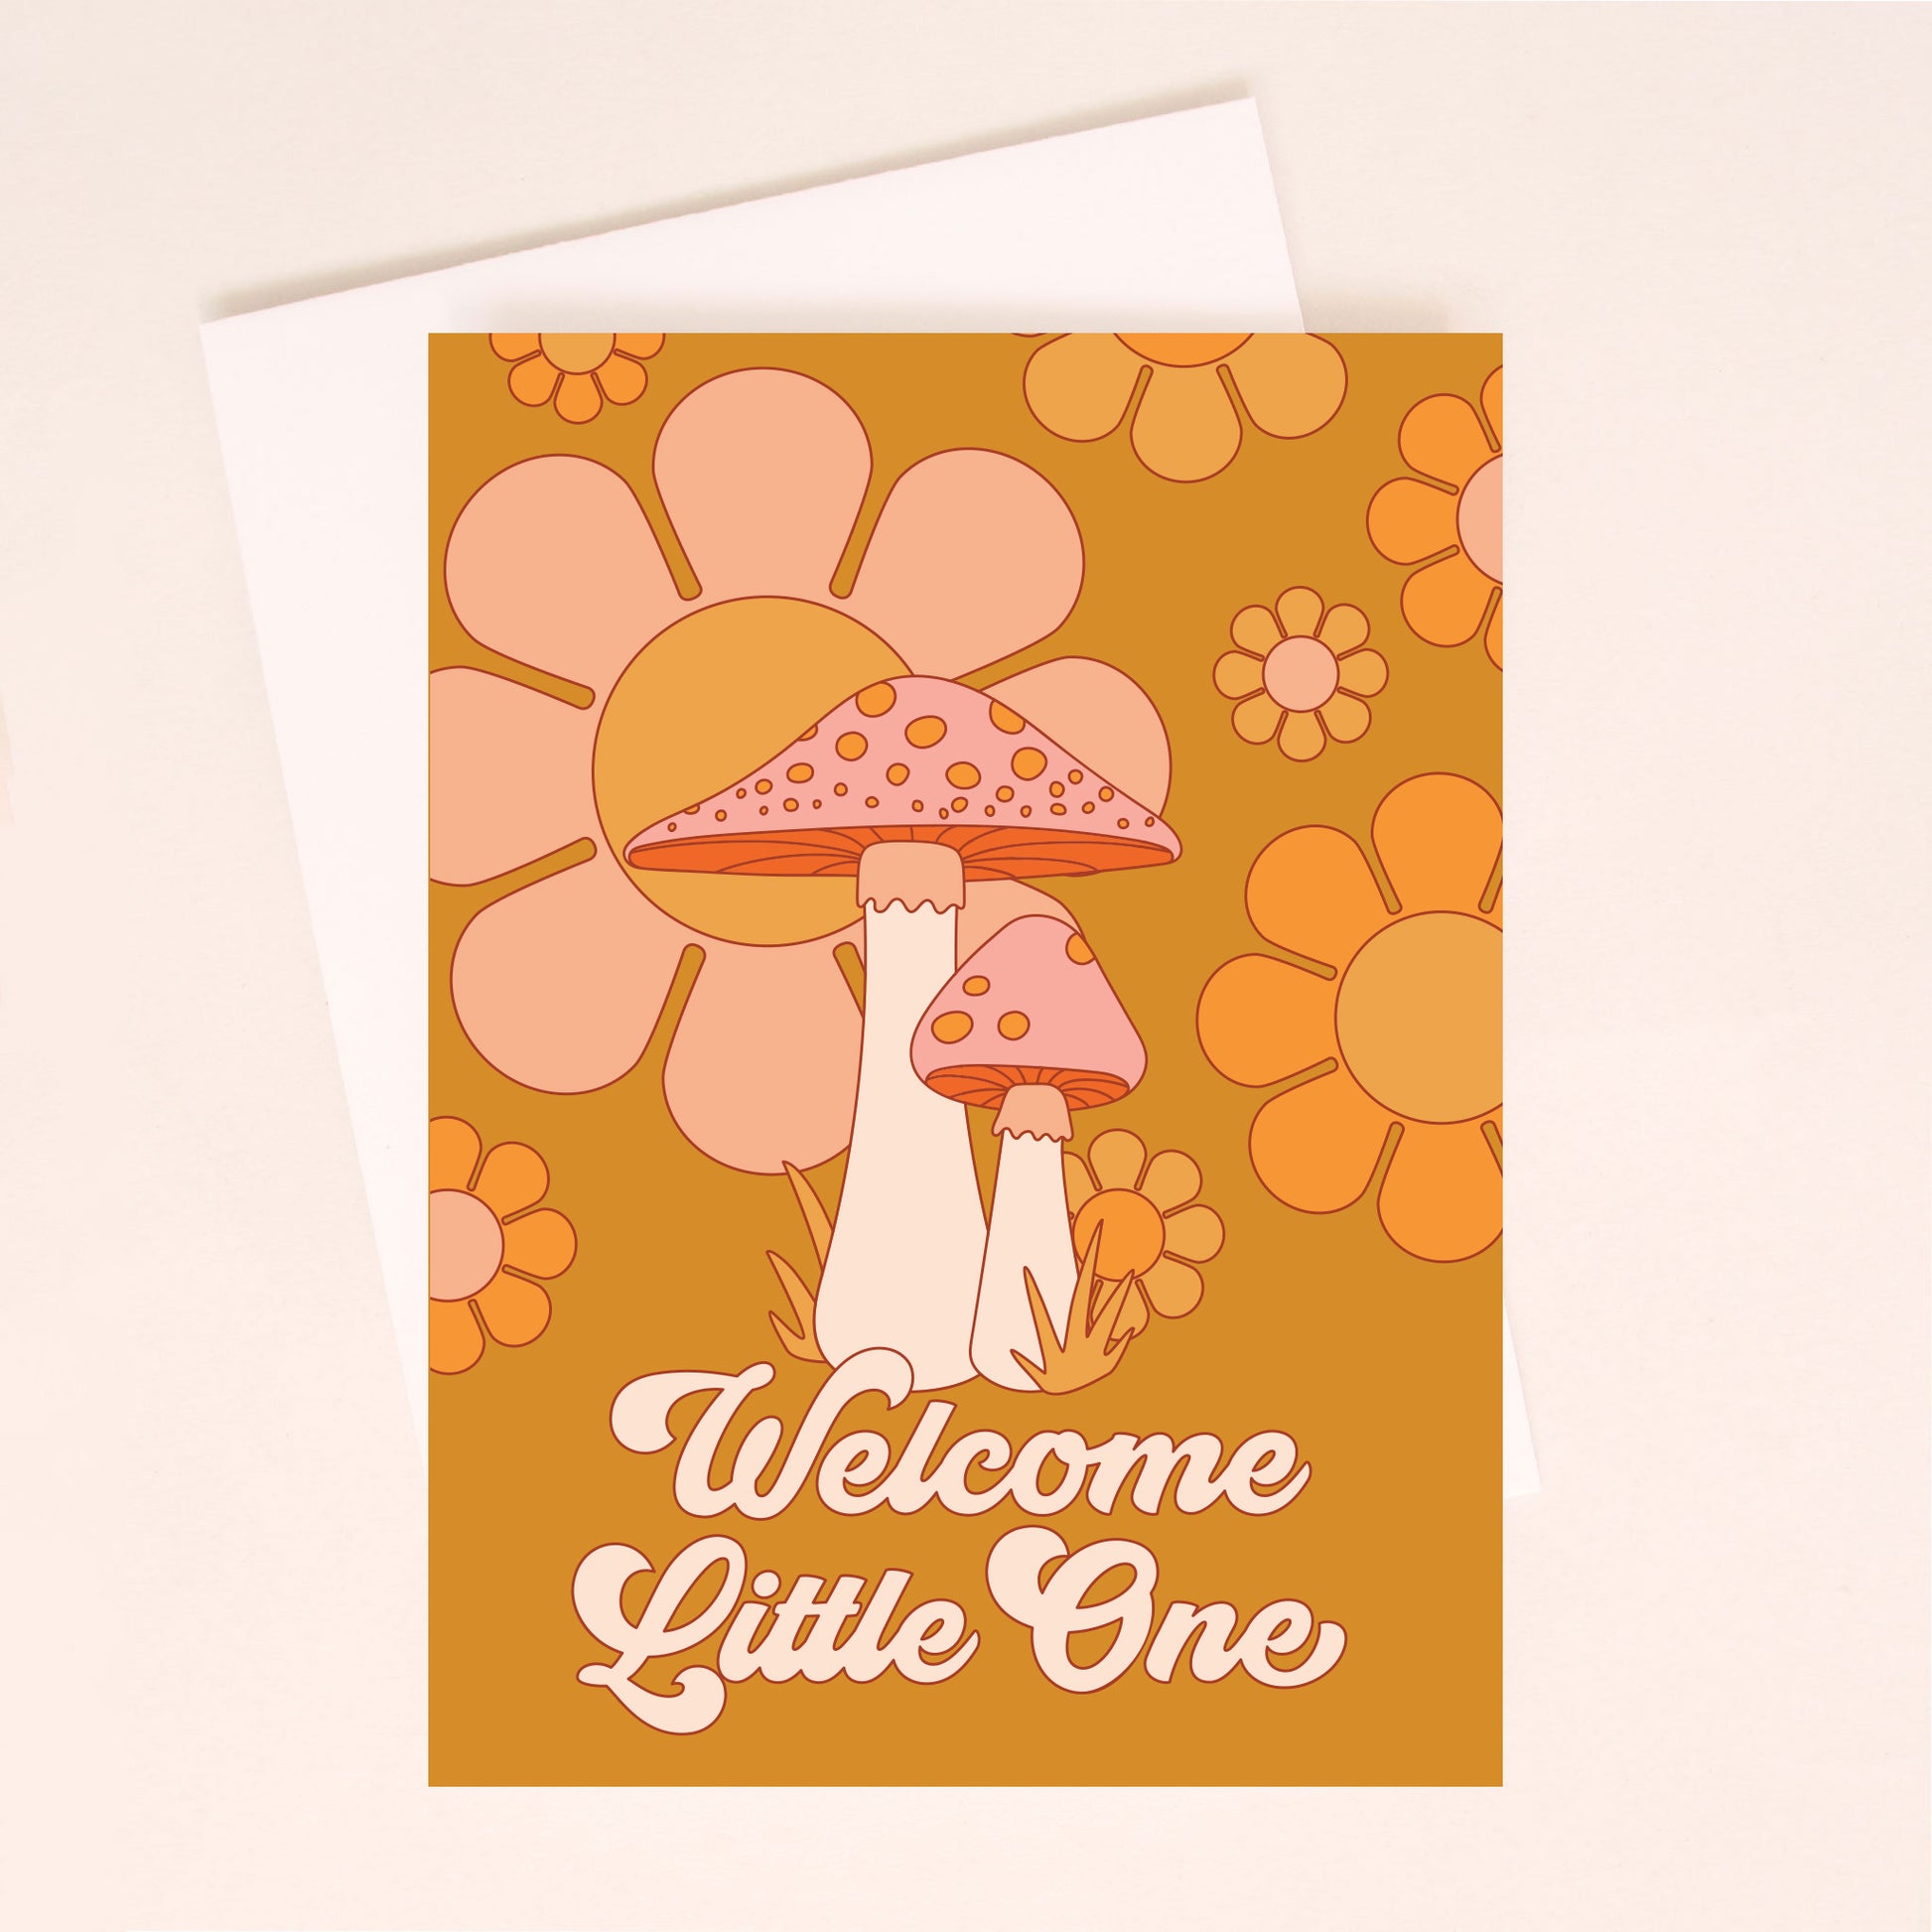 An orange card with two mushroom graphics in front of a daisy print and text that reads, "Welcome Little One" in cream letters.